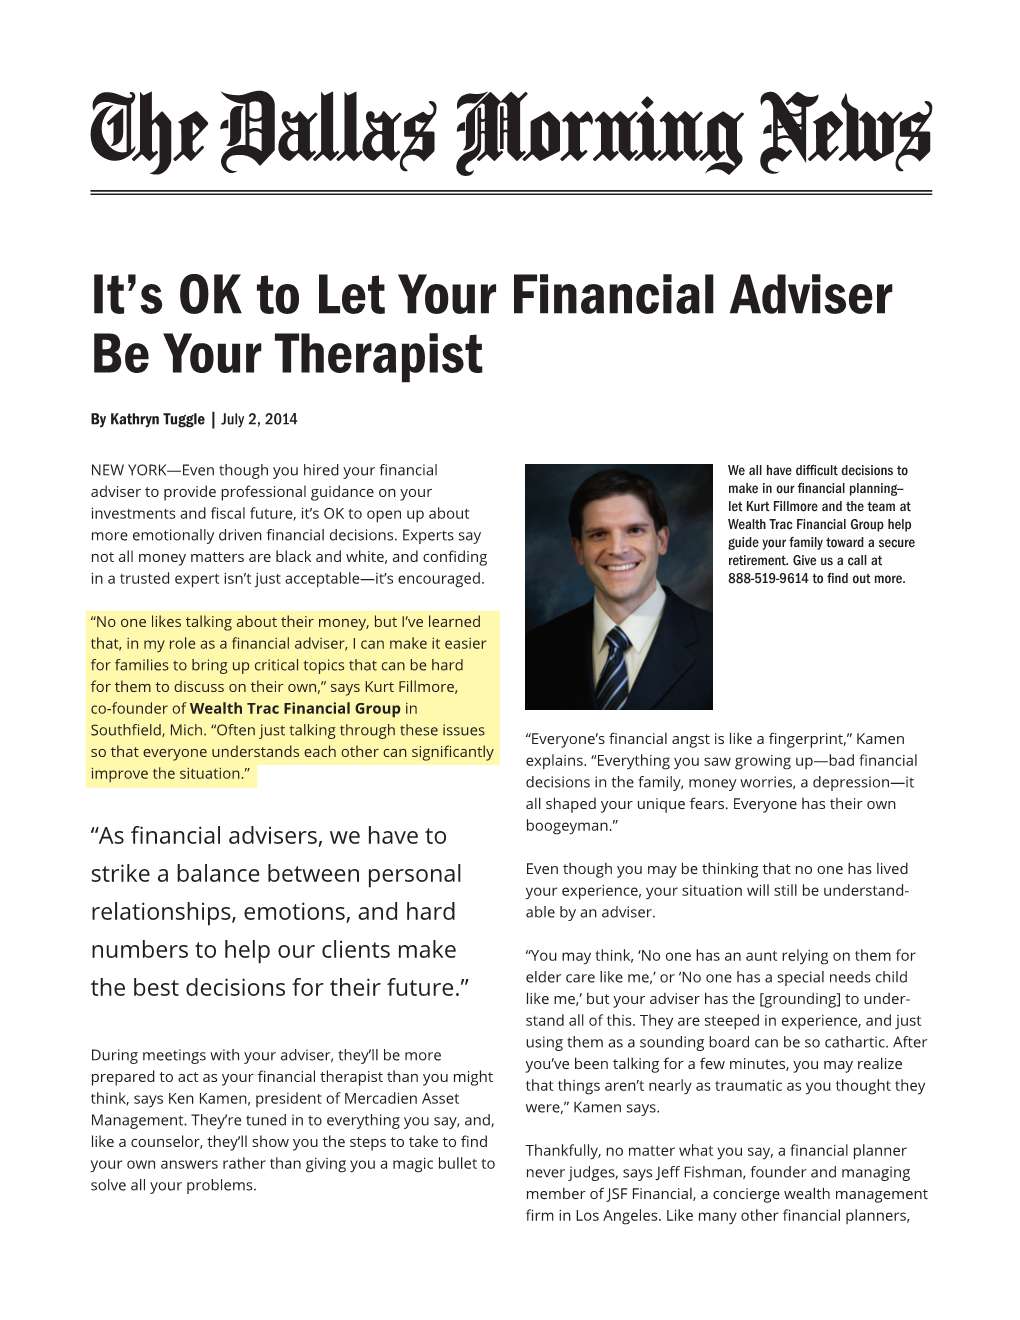 It's OK to Let Your Financial Adviser Be Your Therapist